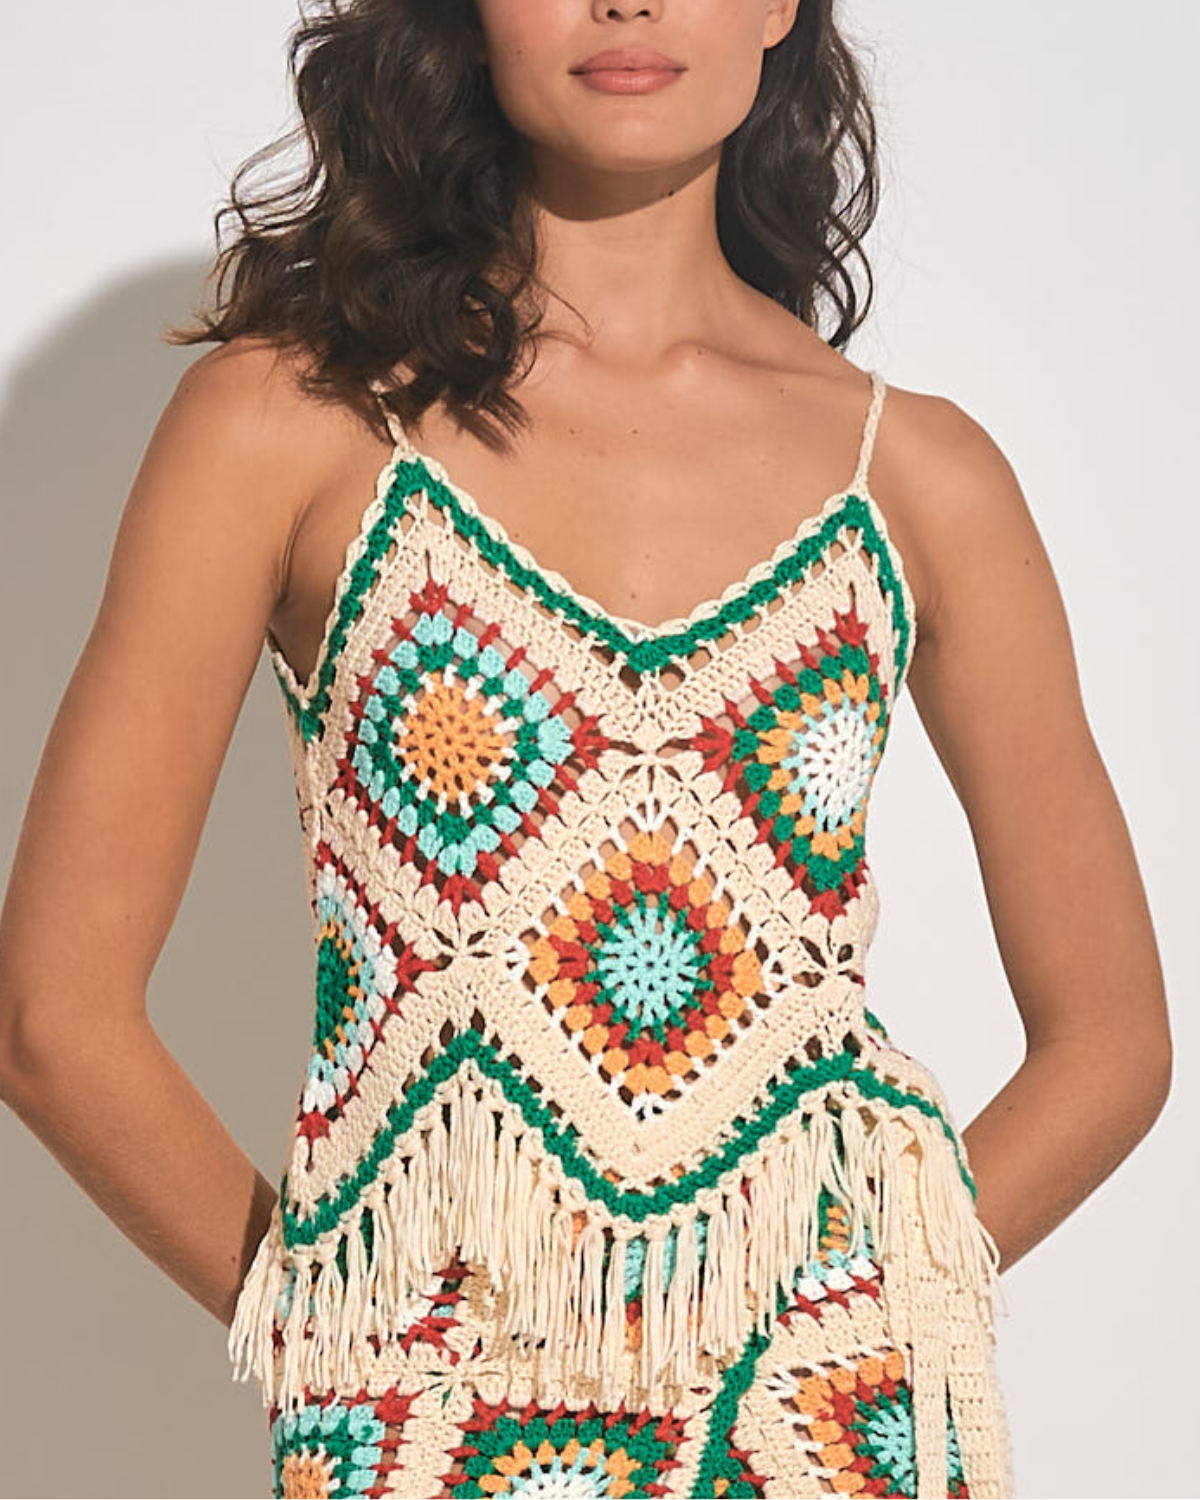 Model wearing a crochet tank top in white, green, yellow, blue and red